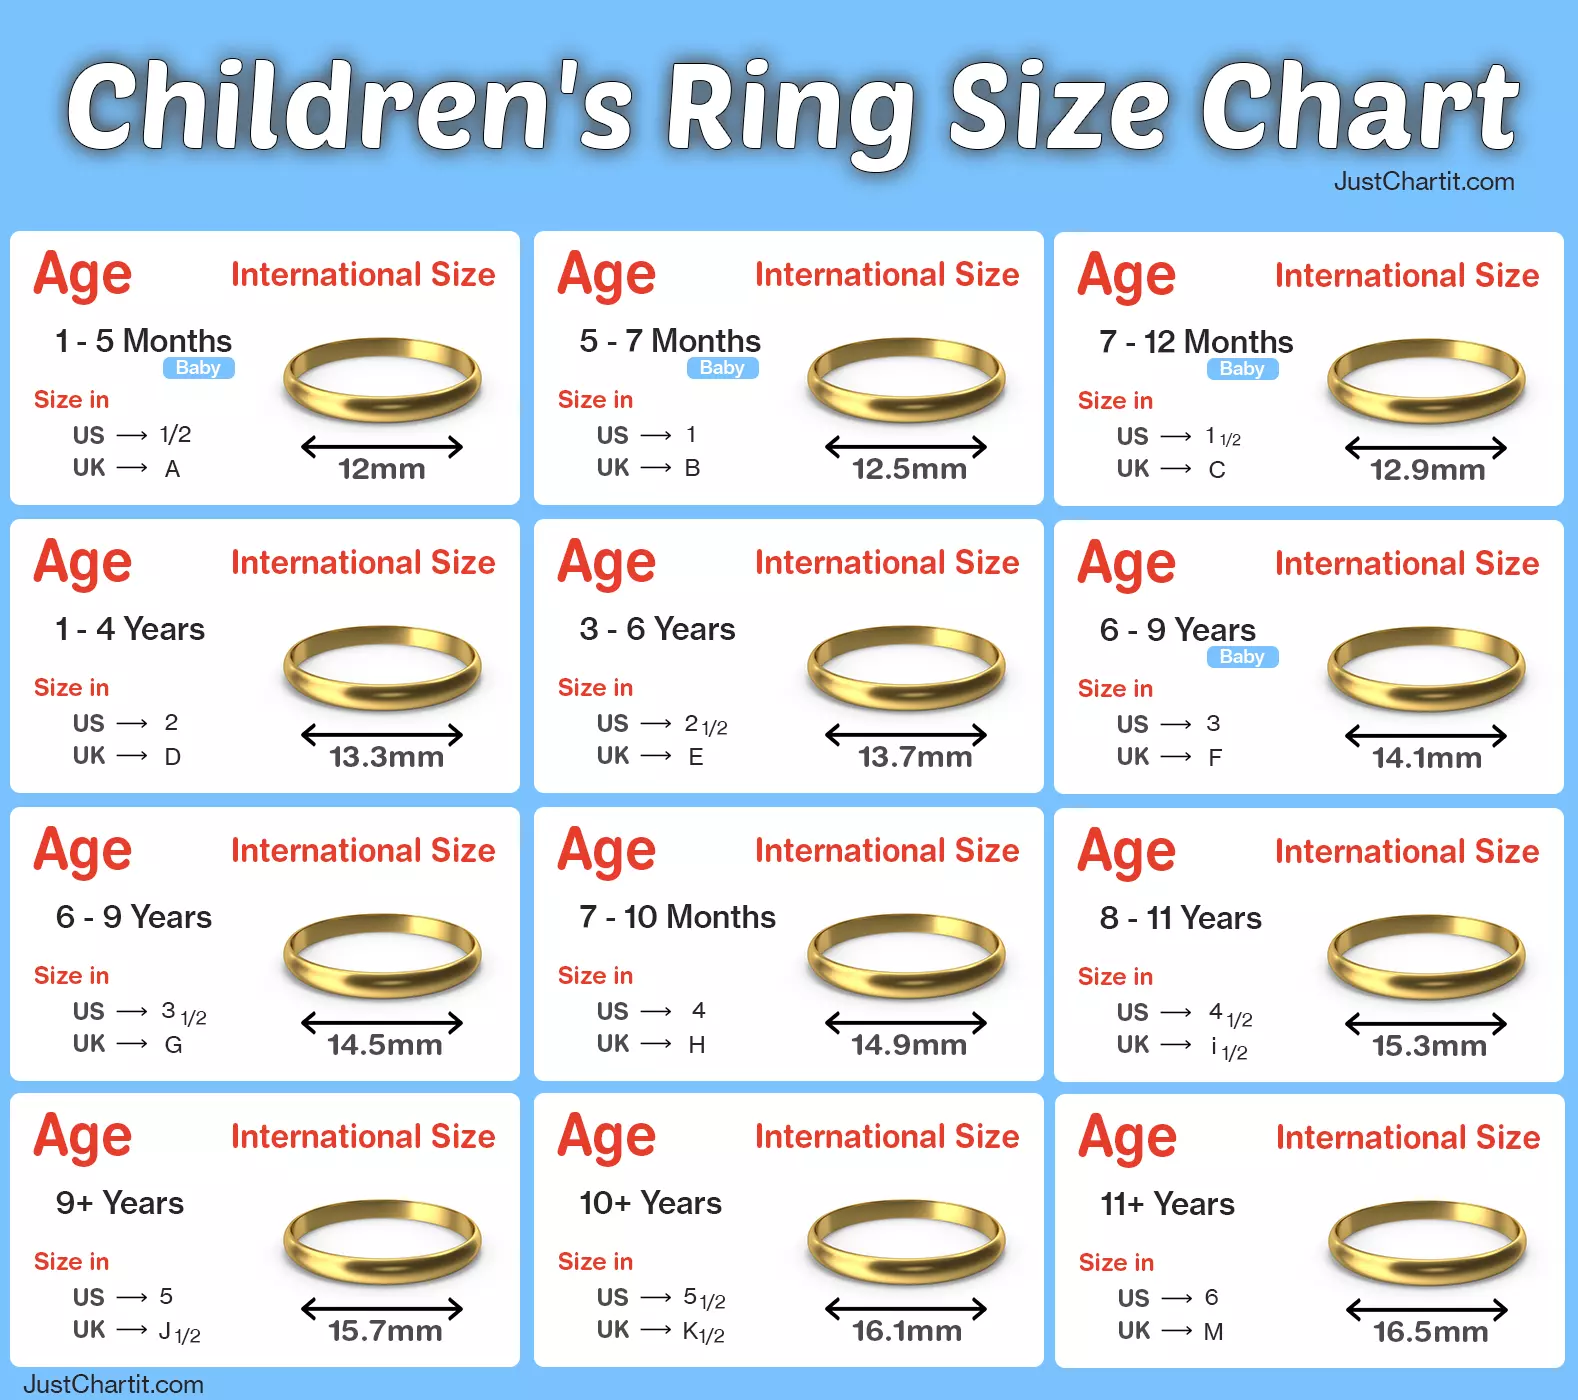 Discover 154+ ring size chart for girl latest - awesomeenglish.edu.vn